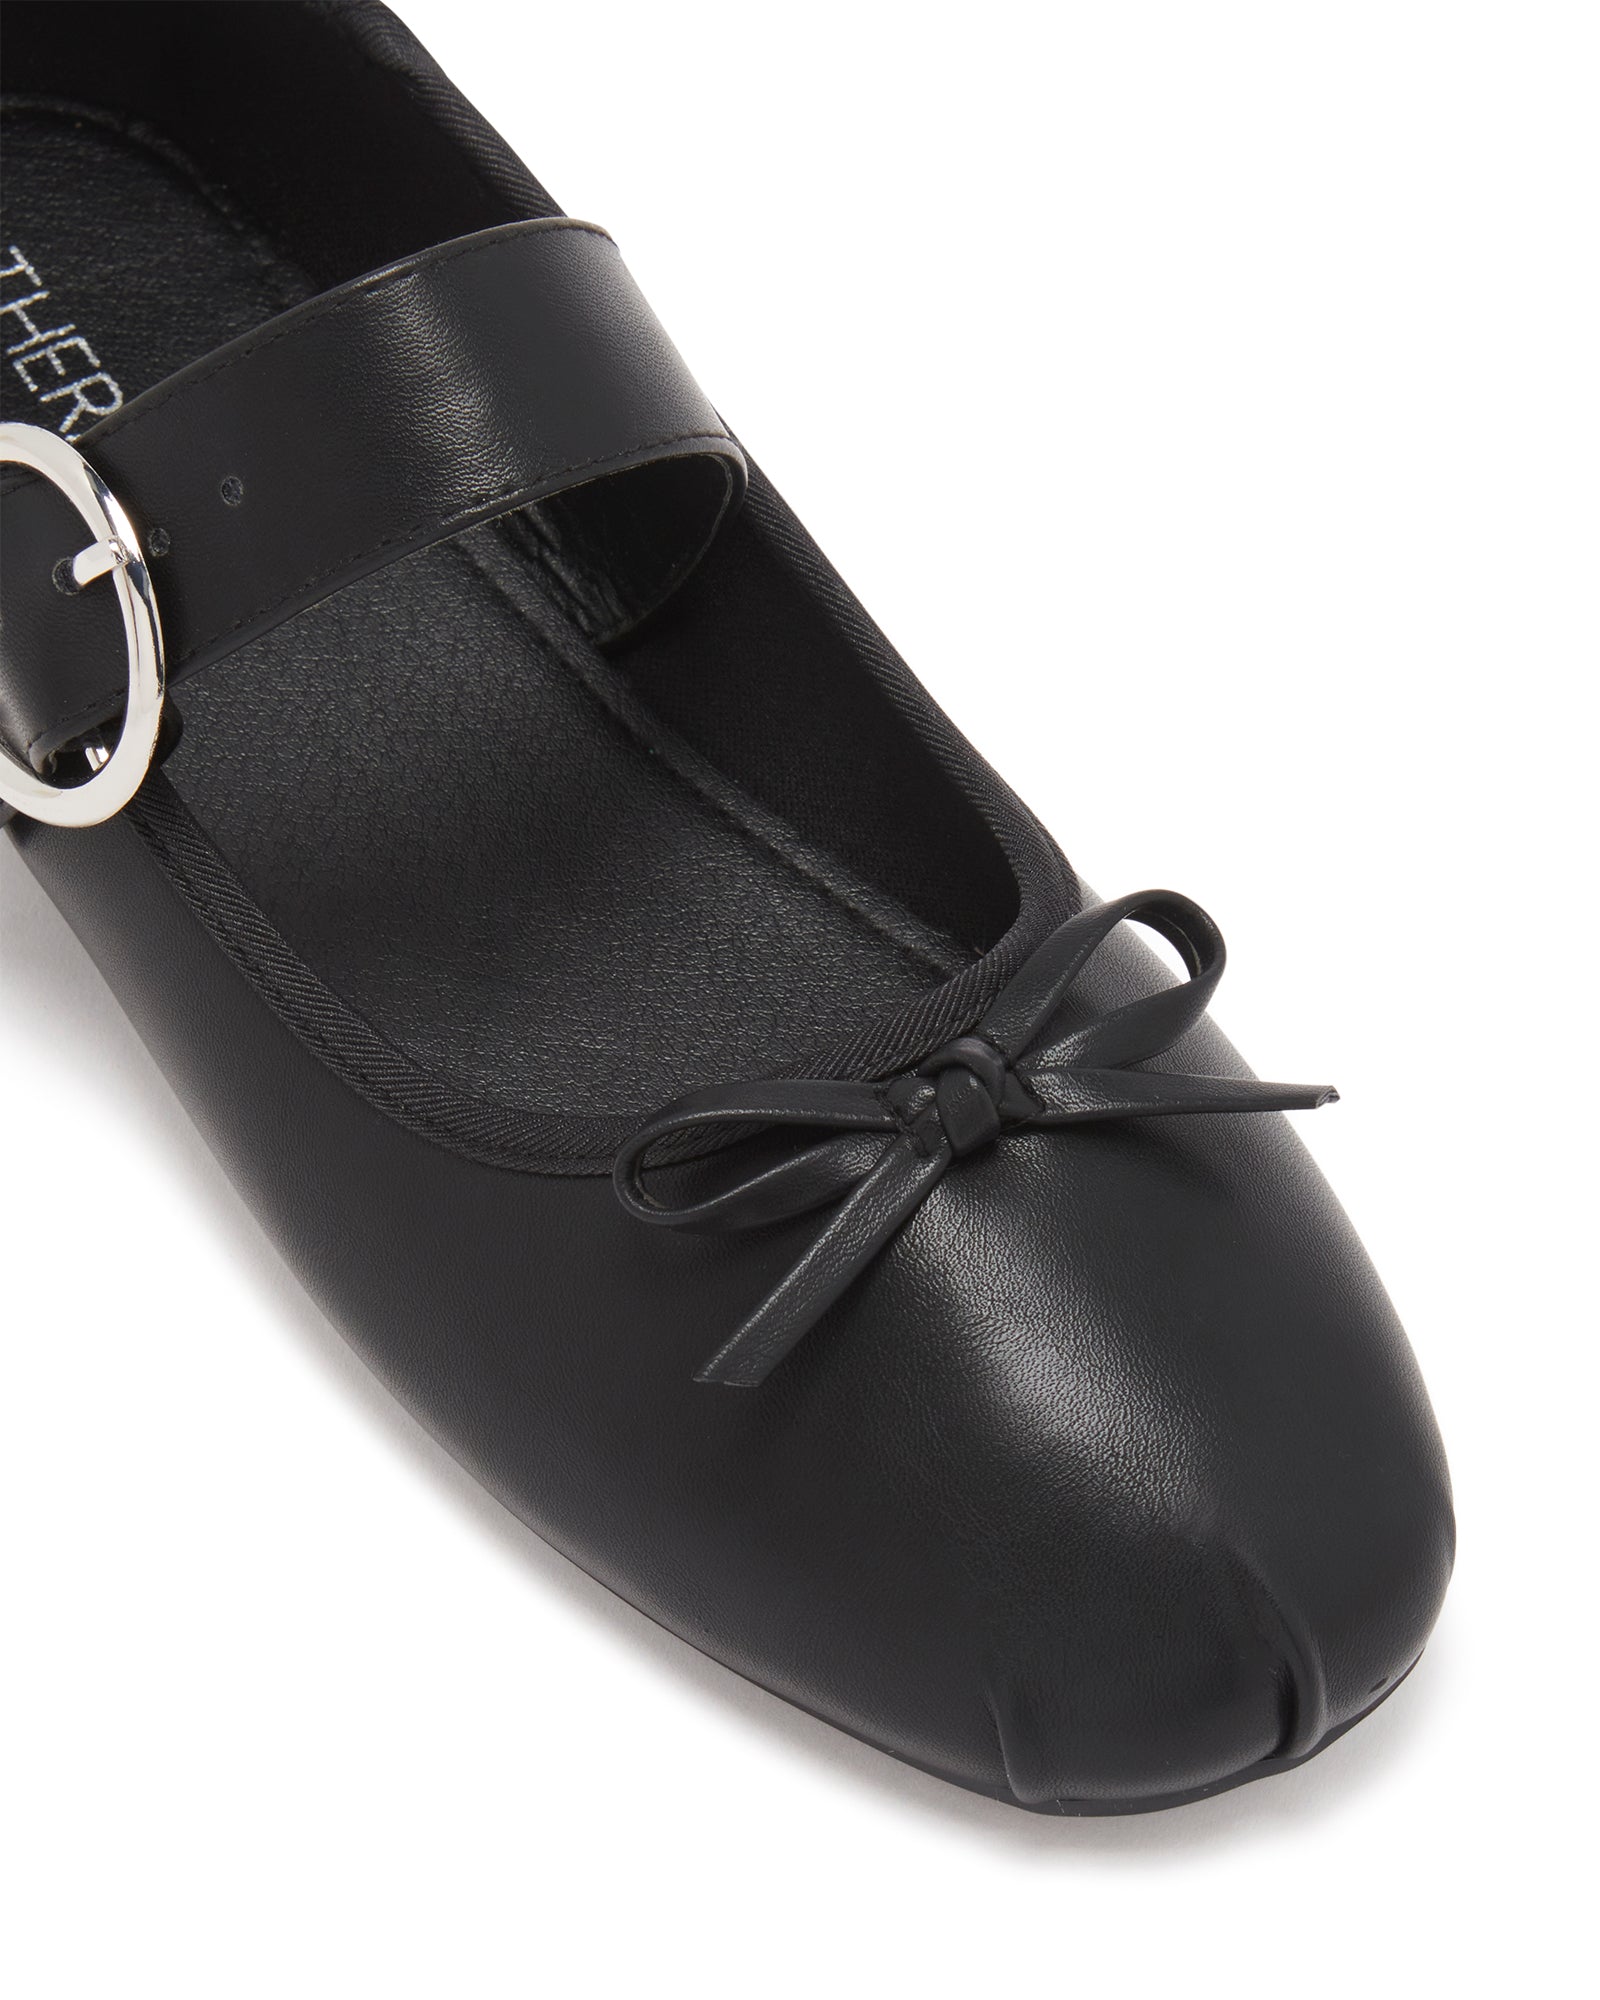 Therapy Shoes Mesmerize Black Smooth | Women's Flats | Ballet | Mary Jane